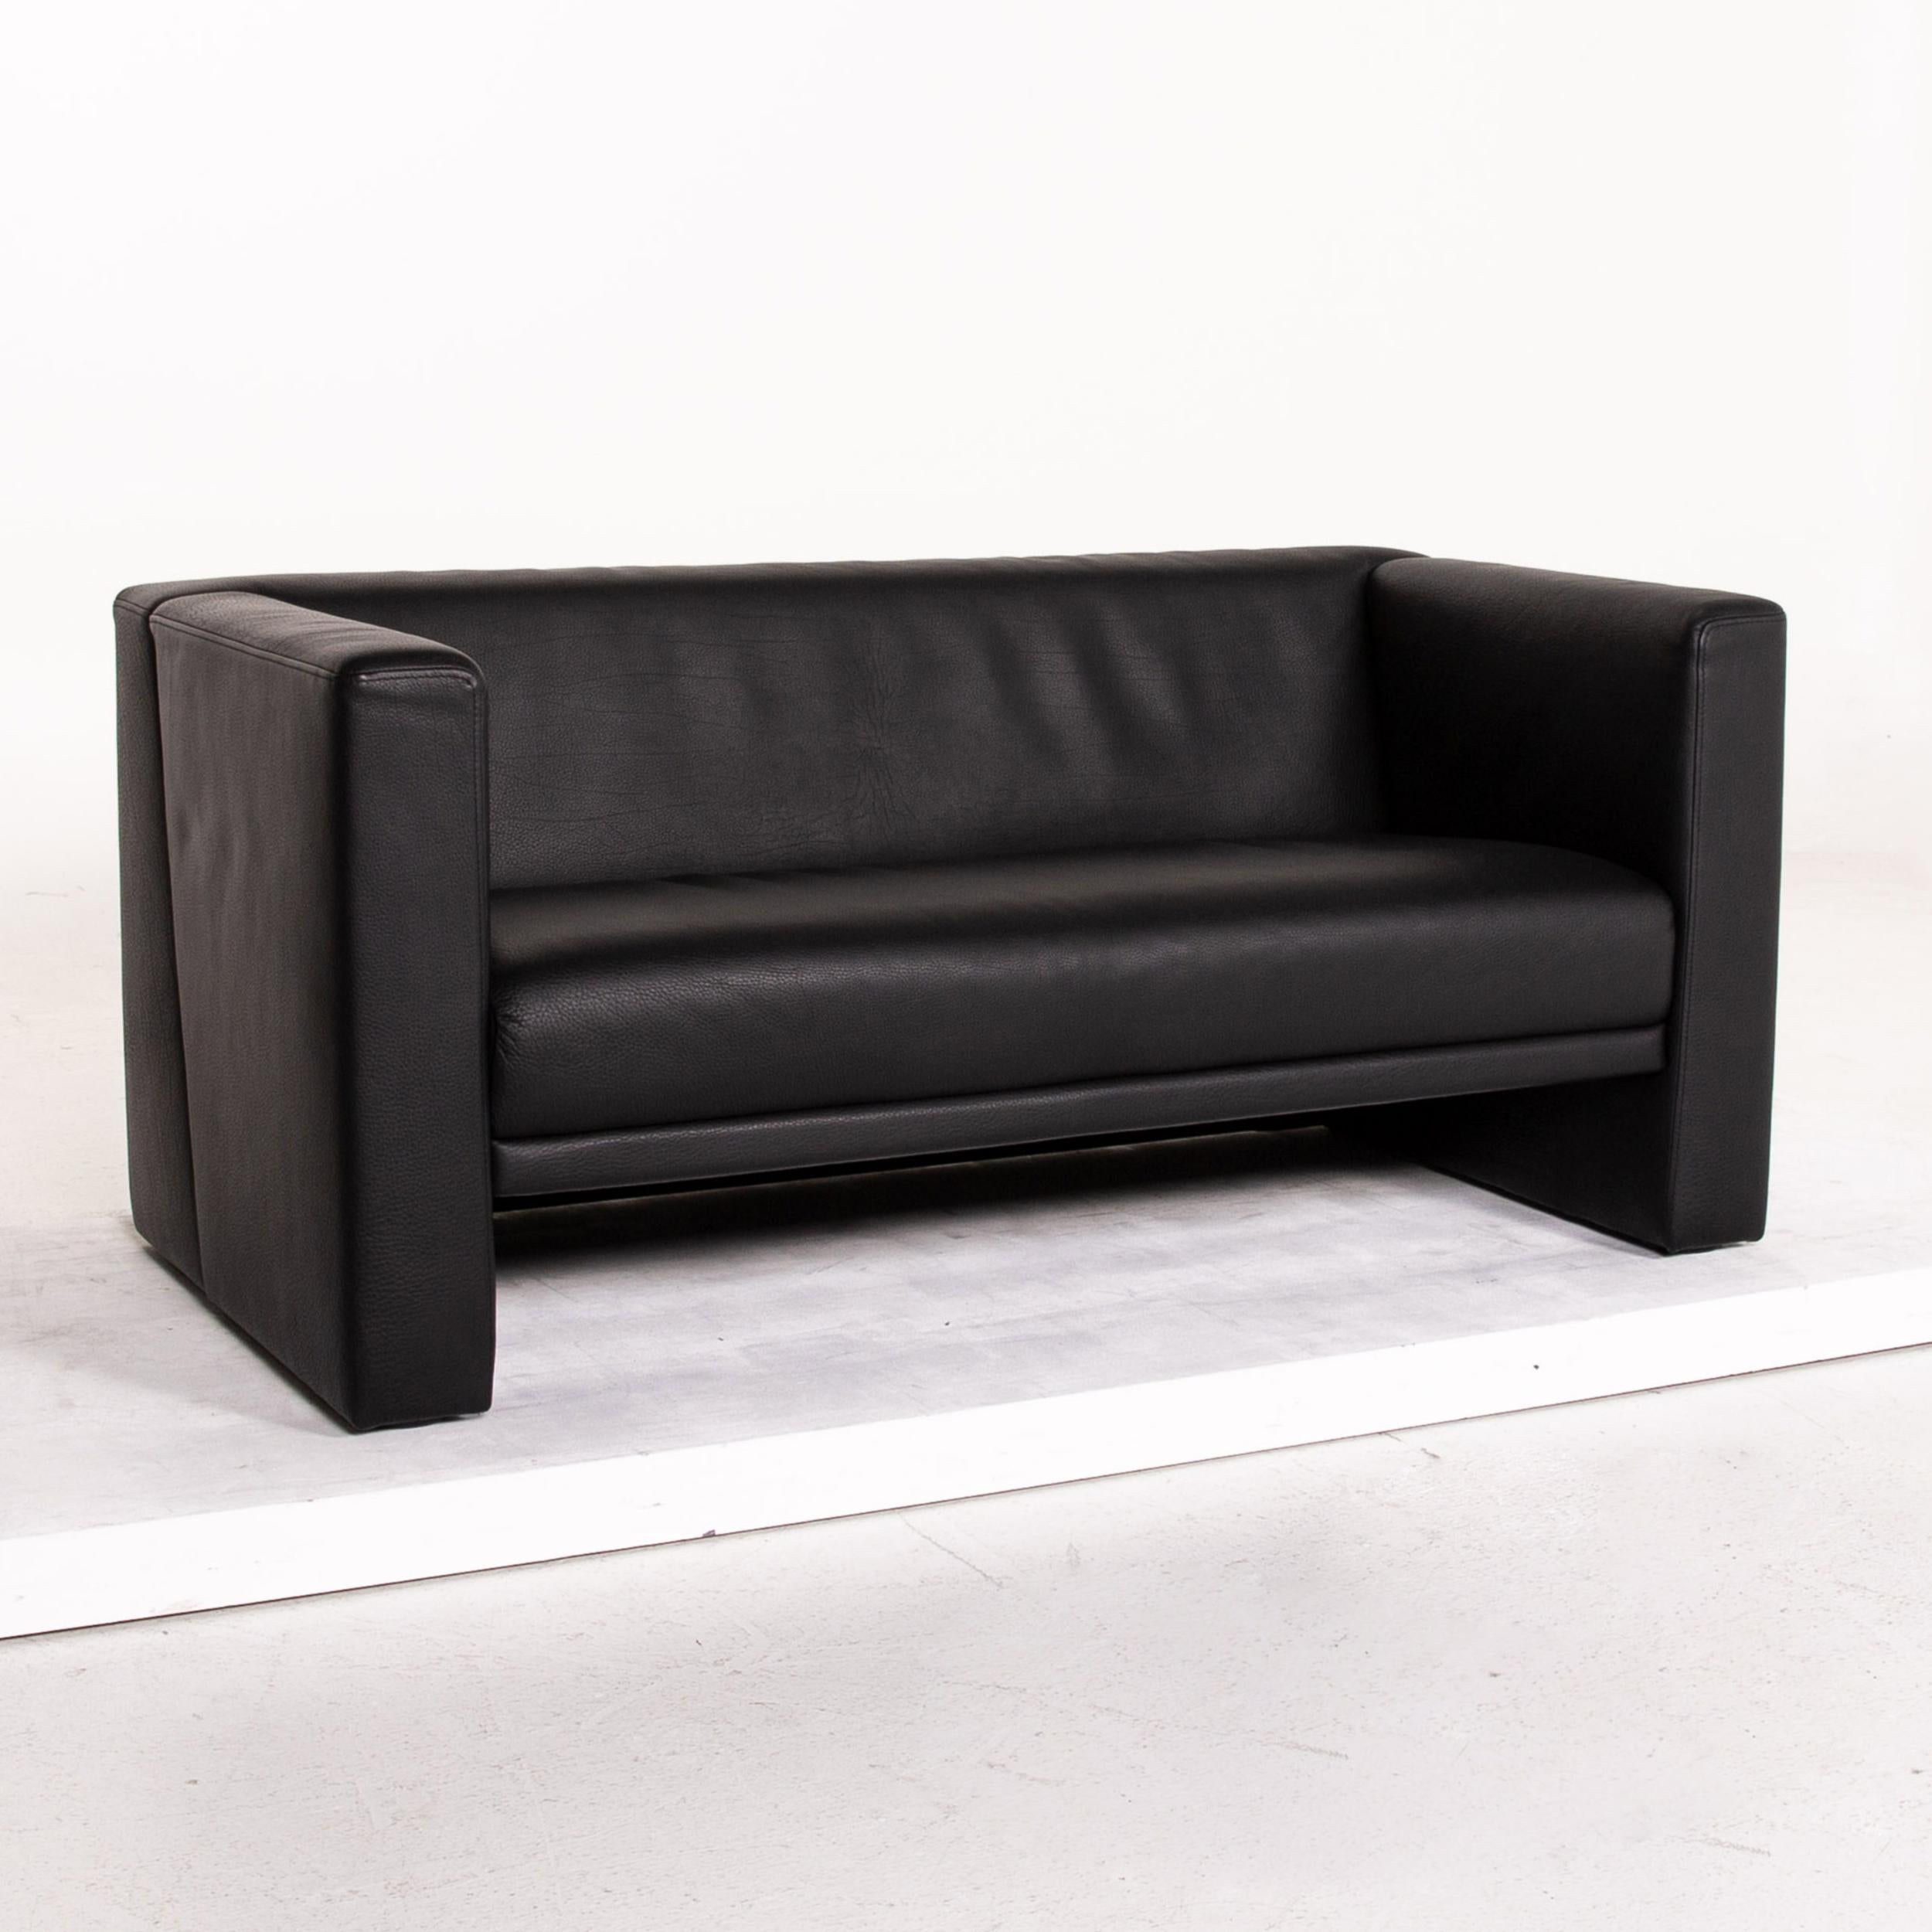 Contemporary Brühl & Sippold Visavis Leather Sofa Black Two-Seat Couch For Sale